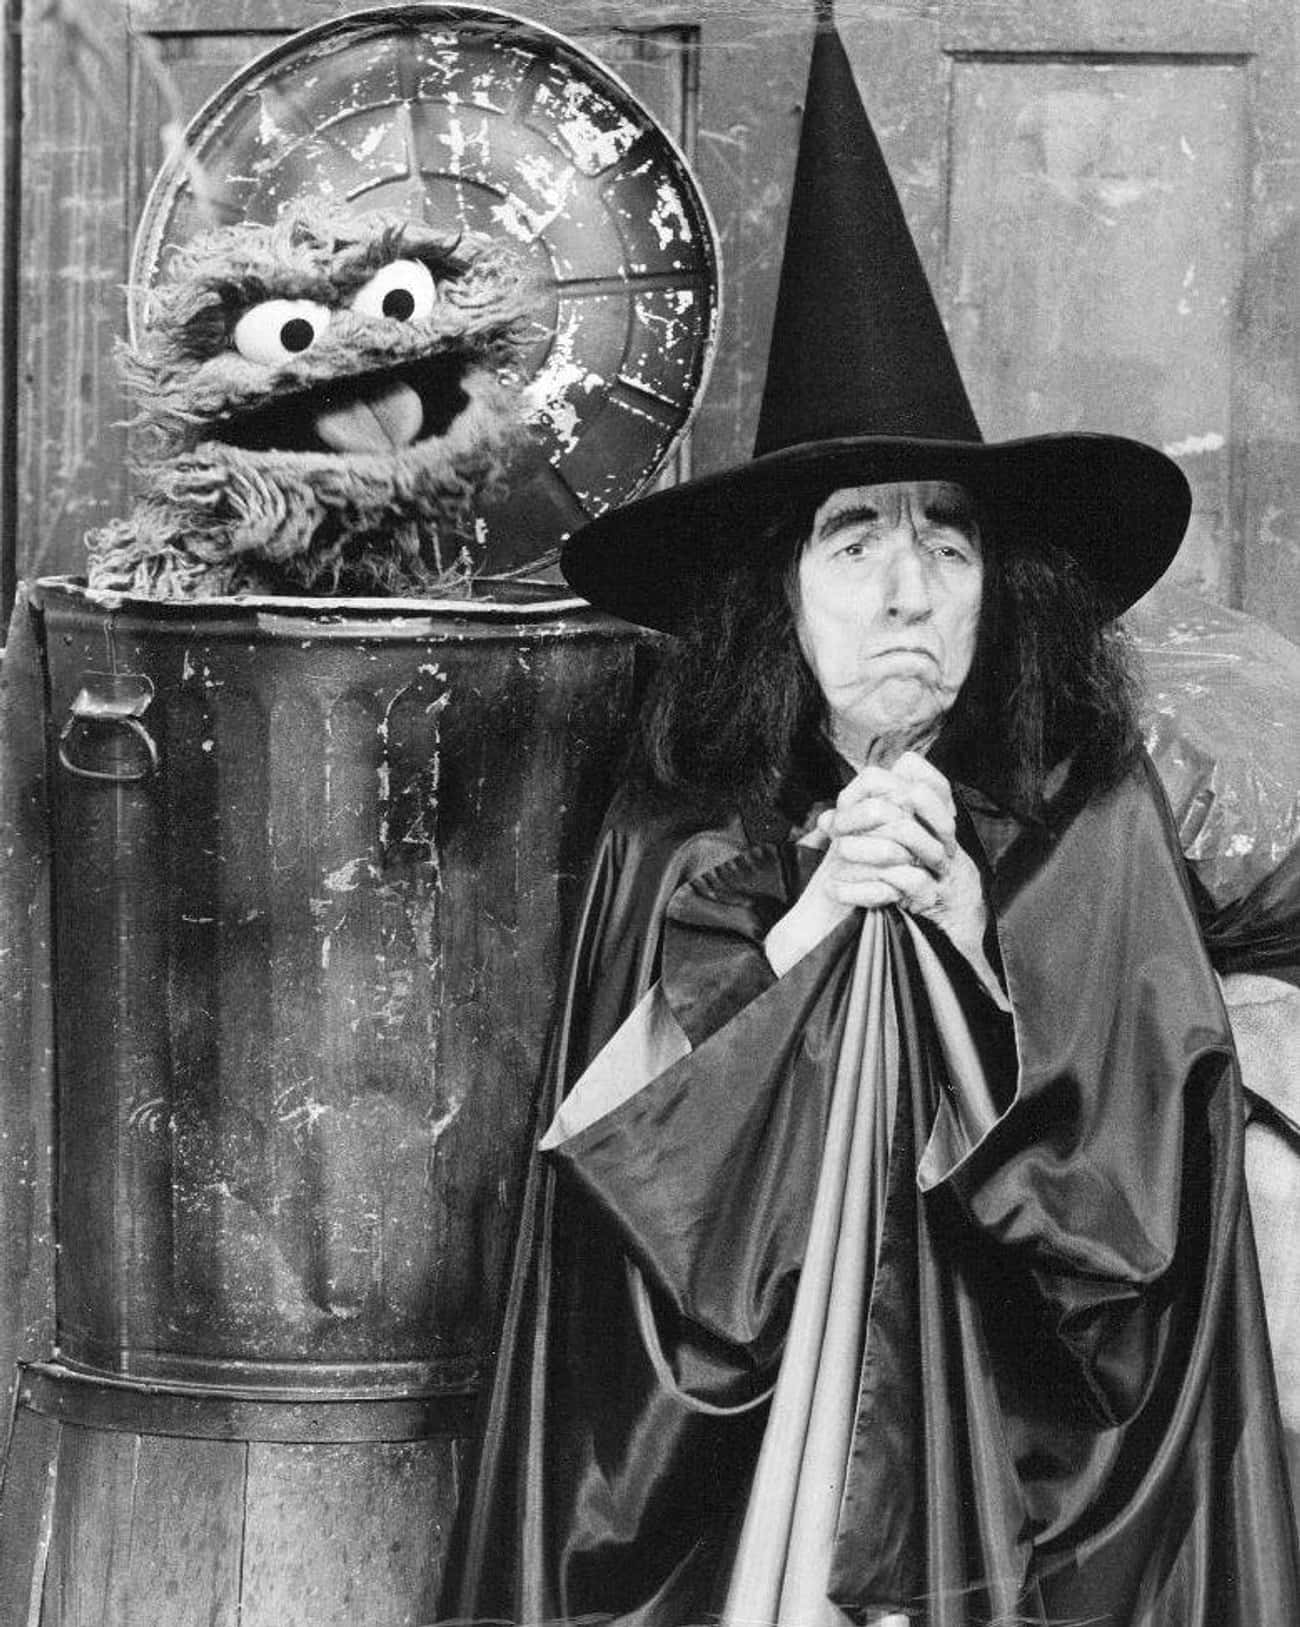 She Played The Wicked Witch On A Controversial Episode Of 'Sesame Street'